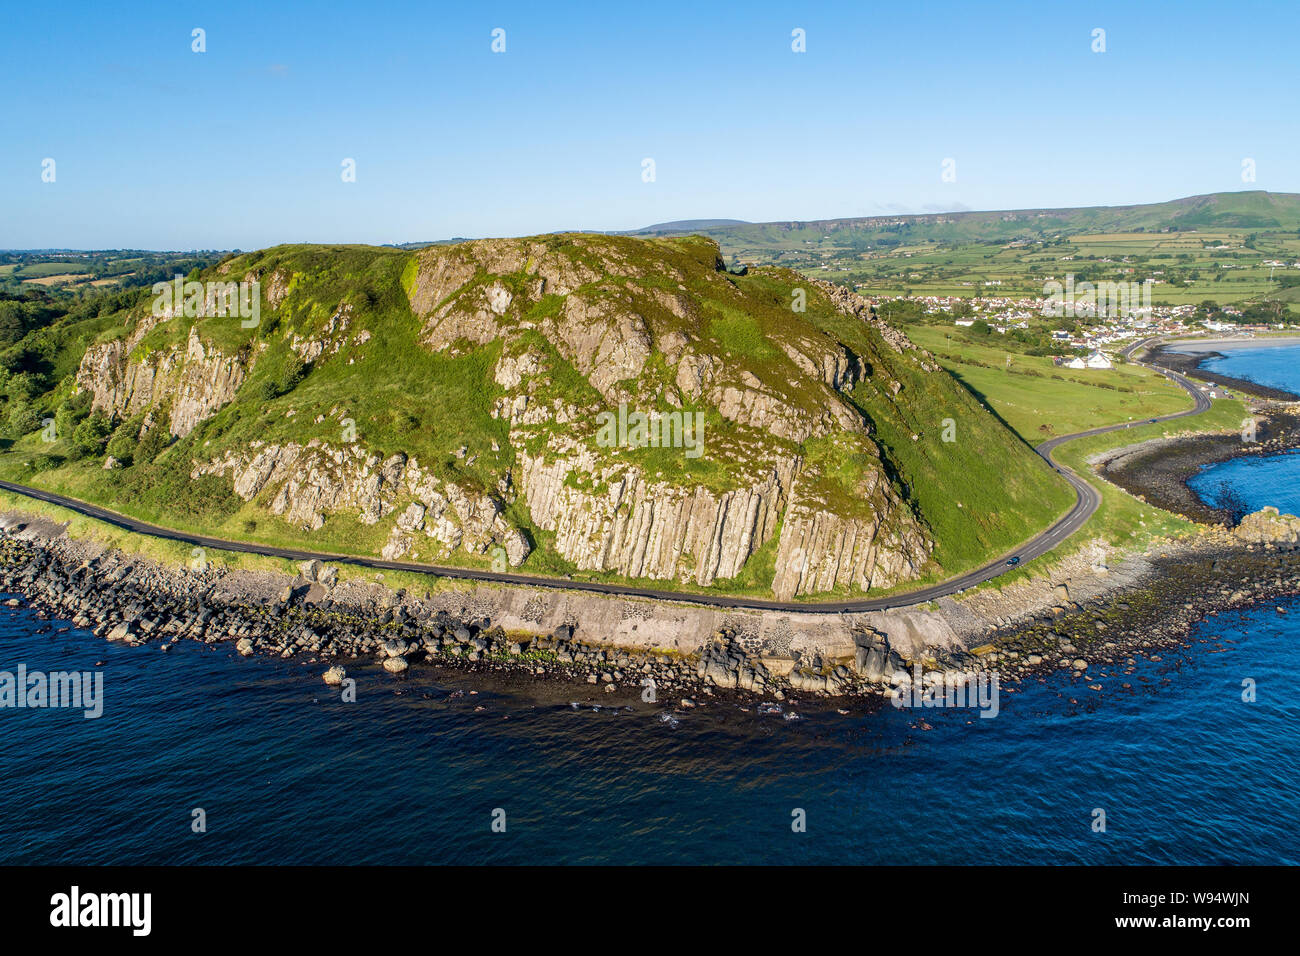 Northern Ireland, UK. Antrim Coast Road a.k.a Causeway Coastal Route near Ballygalley Head and resort. One of the most scenic coastal roads in Europe. Stock Photo